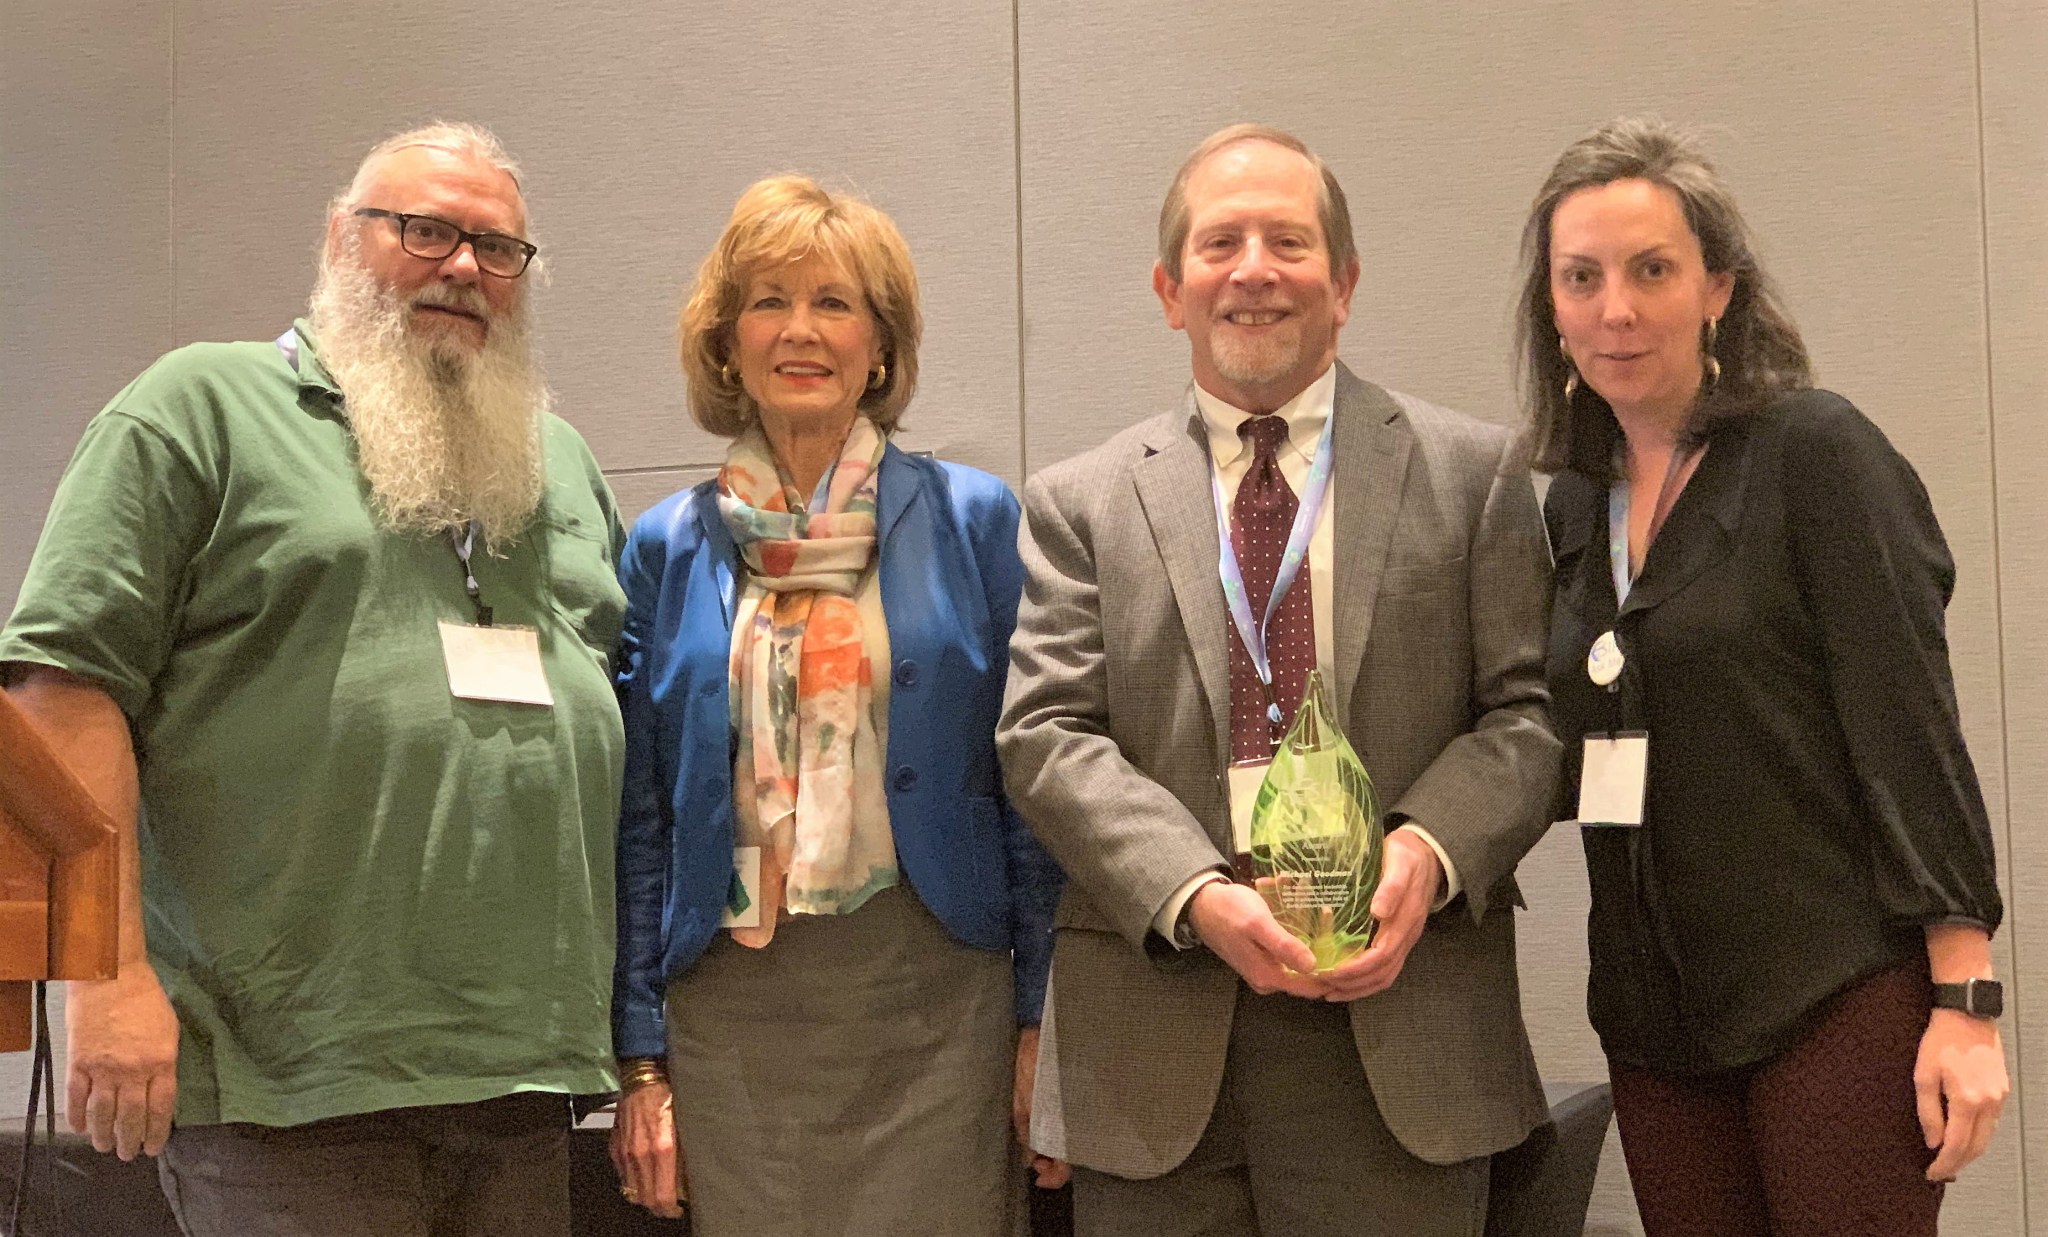 Michael Goodman, center right, receives the Martha Maiden Award at the 2020 Earth Science Information Partners Winter Meeting.